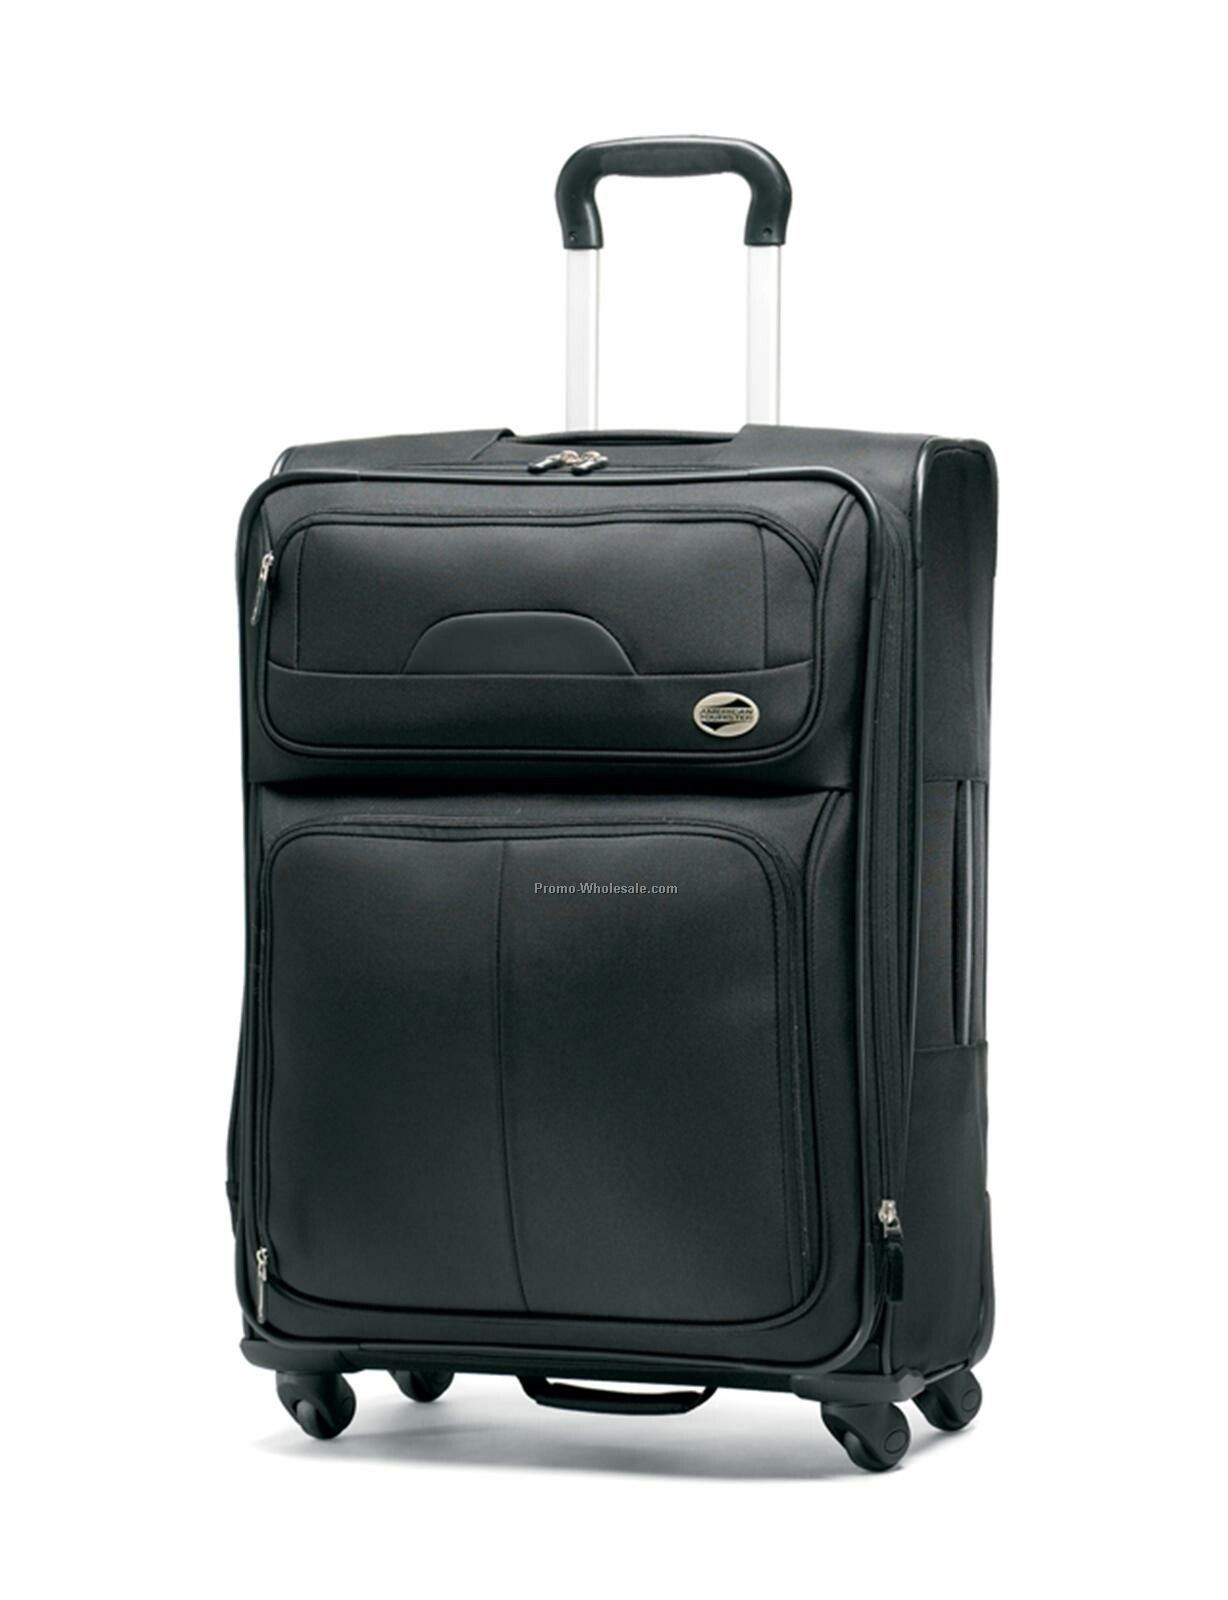 American Tourister Tribute 29" Spinner Upright Luggage